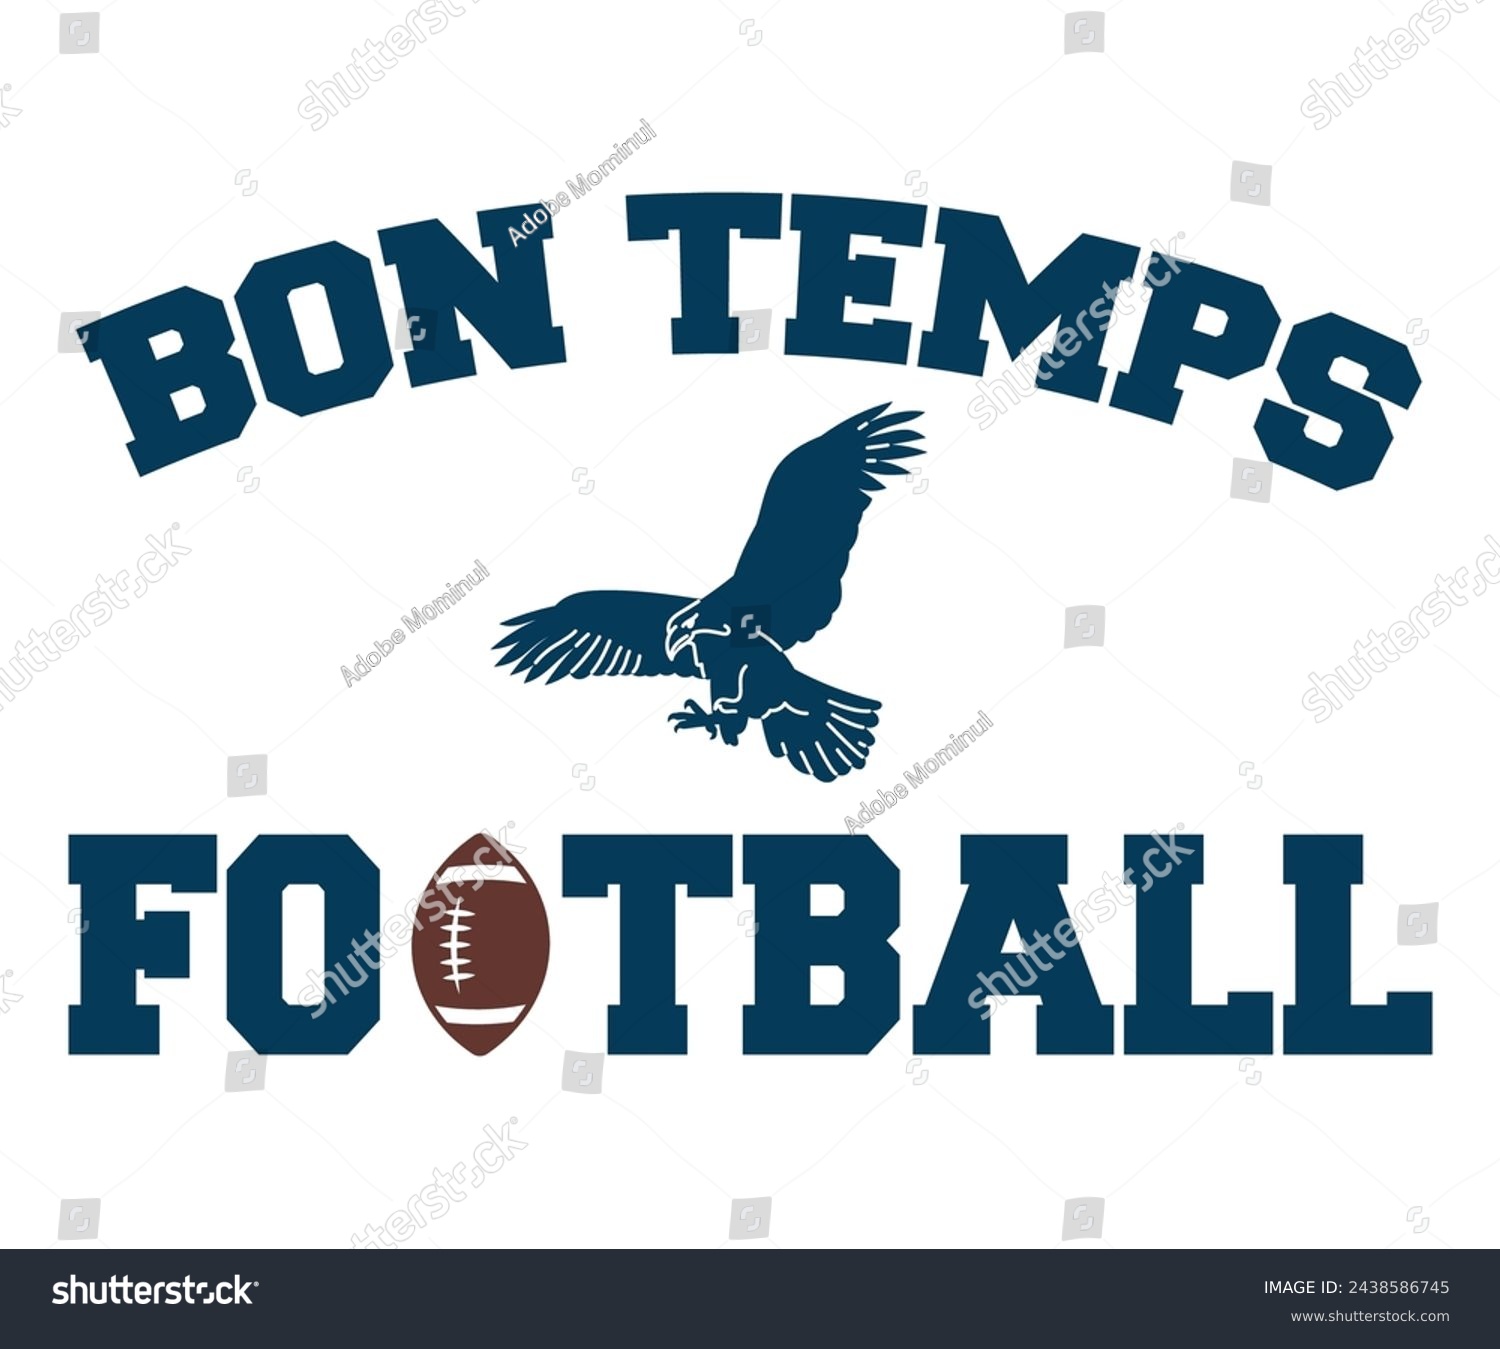 SVG of Bon Temps Football Svg,Football Svg,Football Player Svg,Game Day Shirt,Football Quotes Svg,American Football Svg,Soccer Svg,Cut File,Commercial use svg